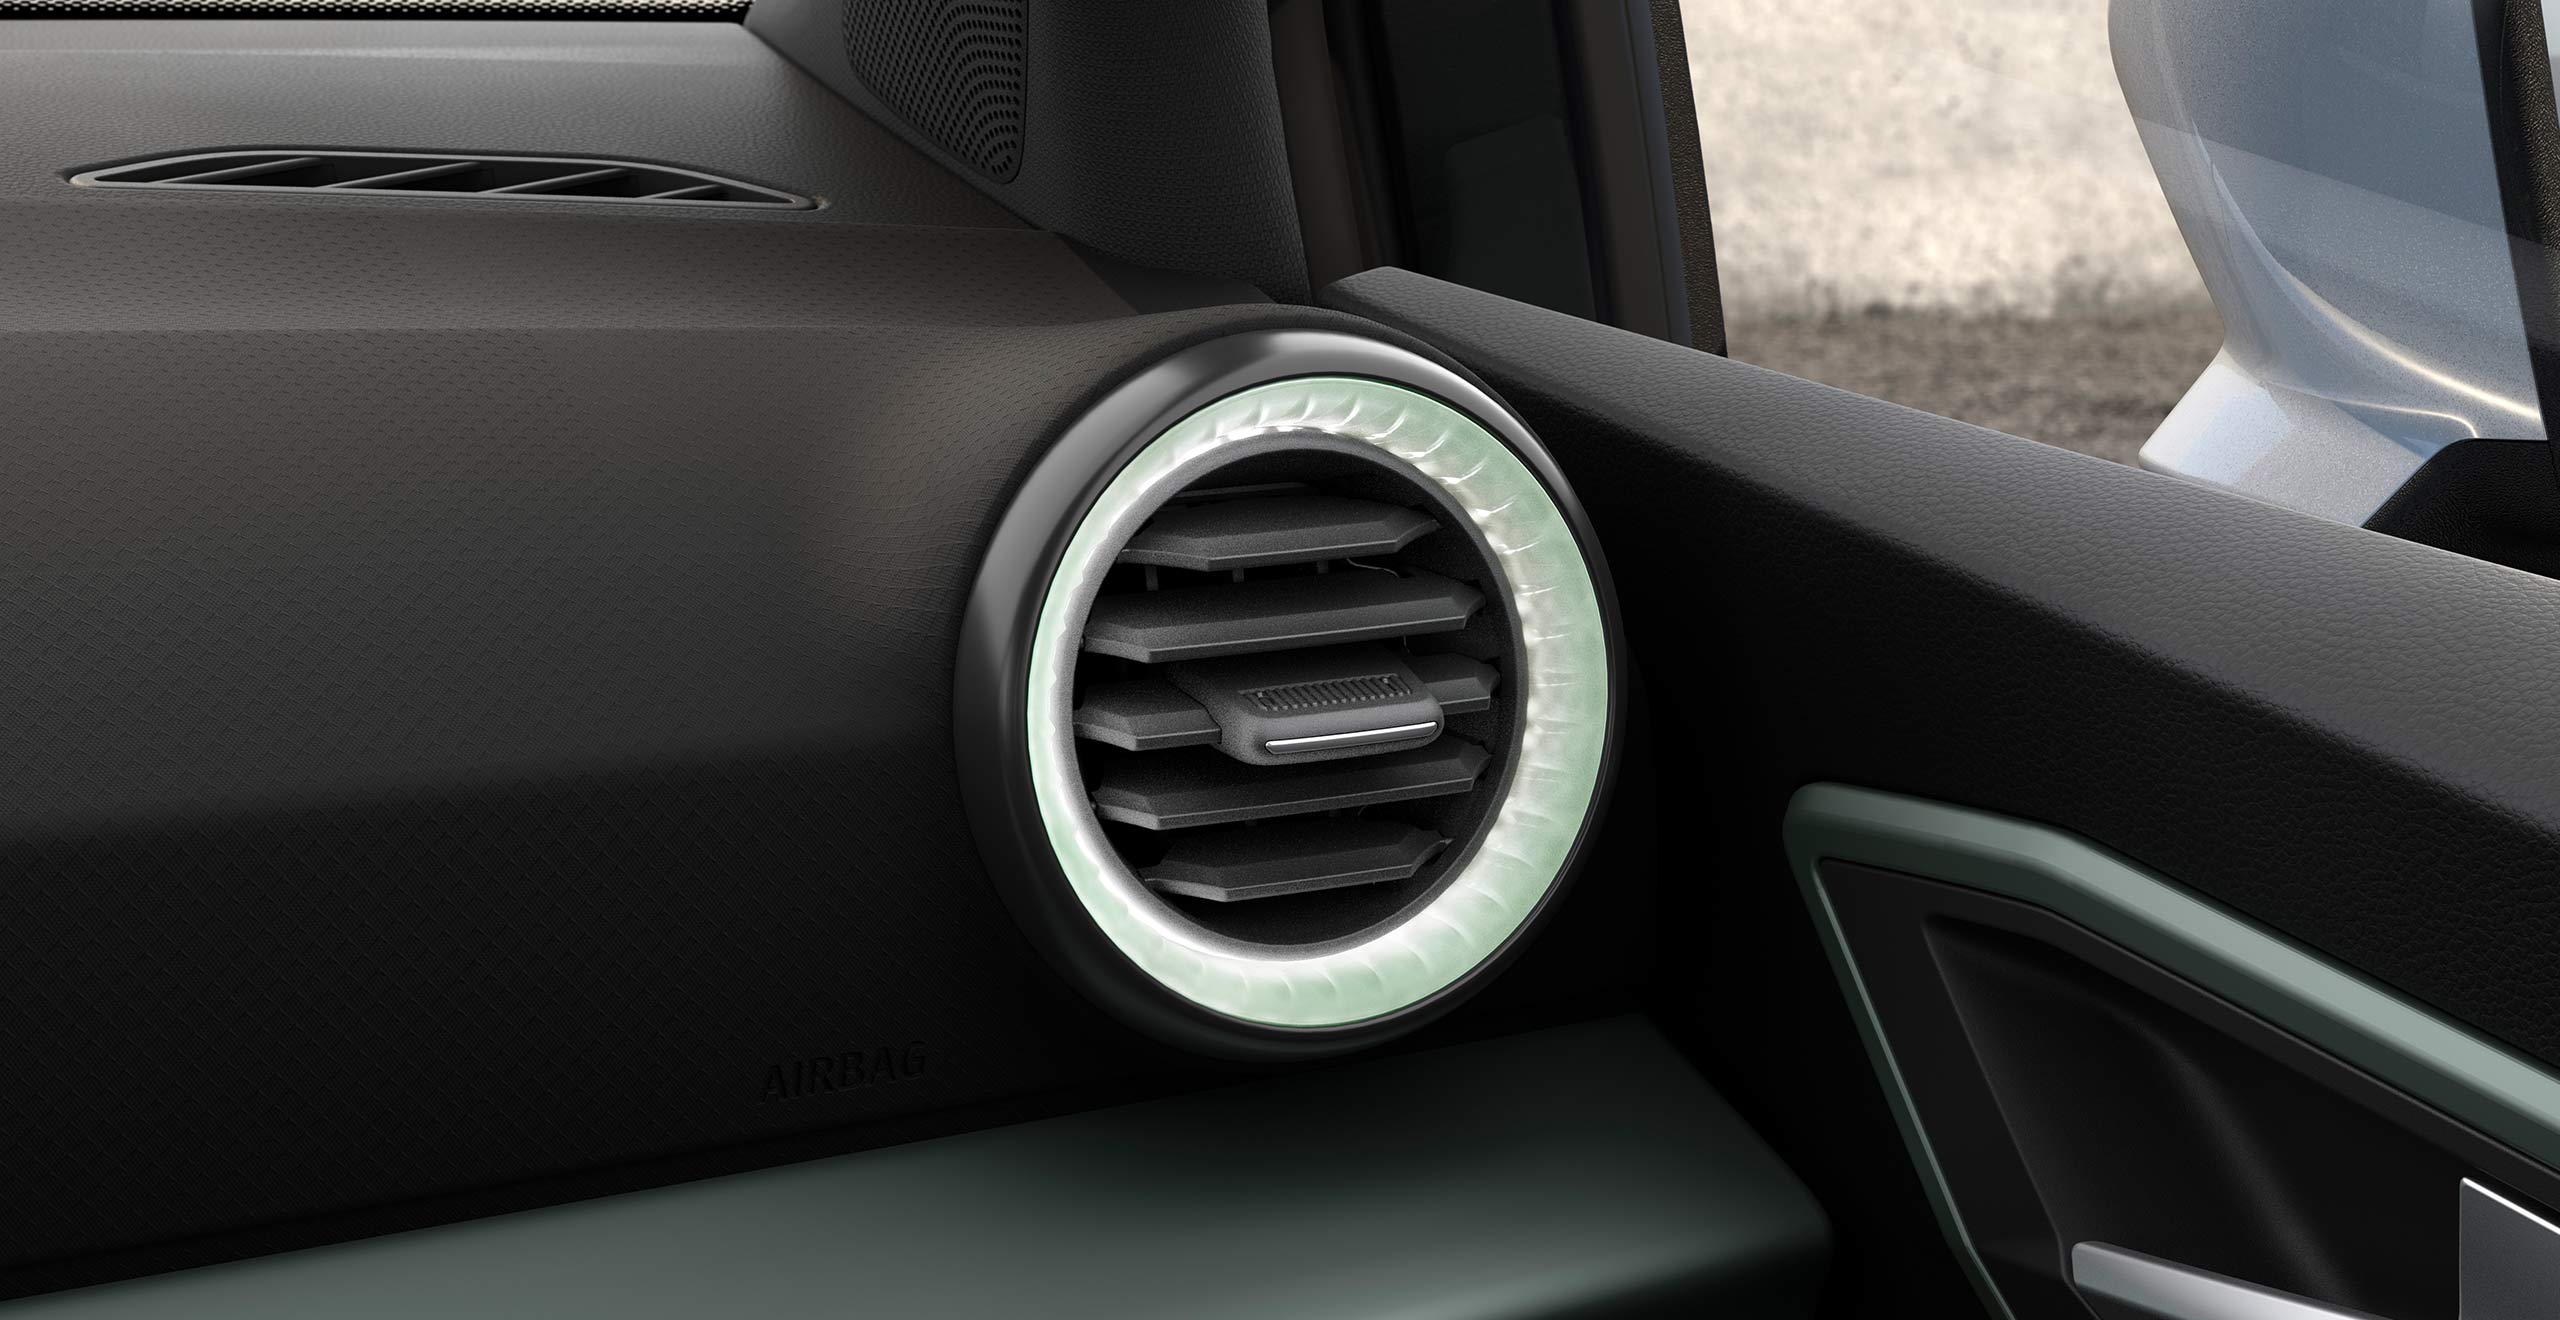 SEAT Arona air vents with LED light.